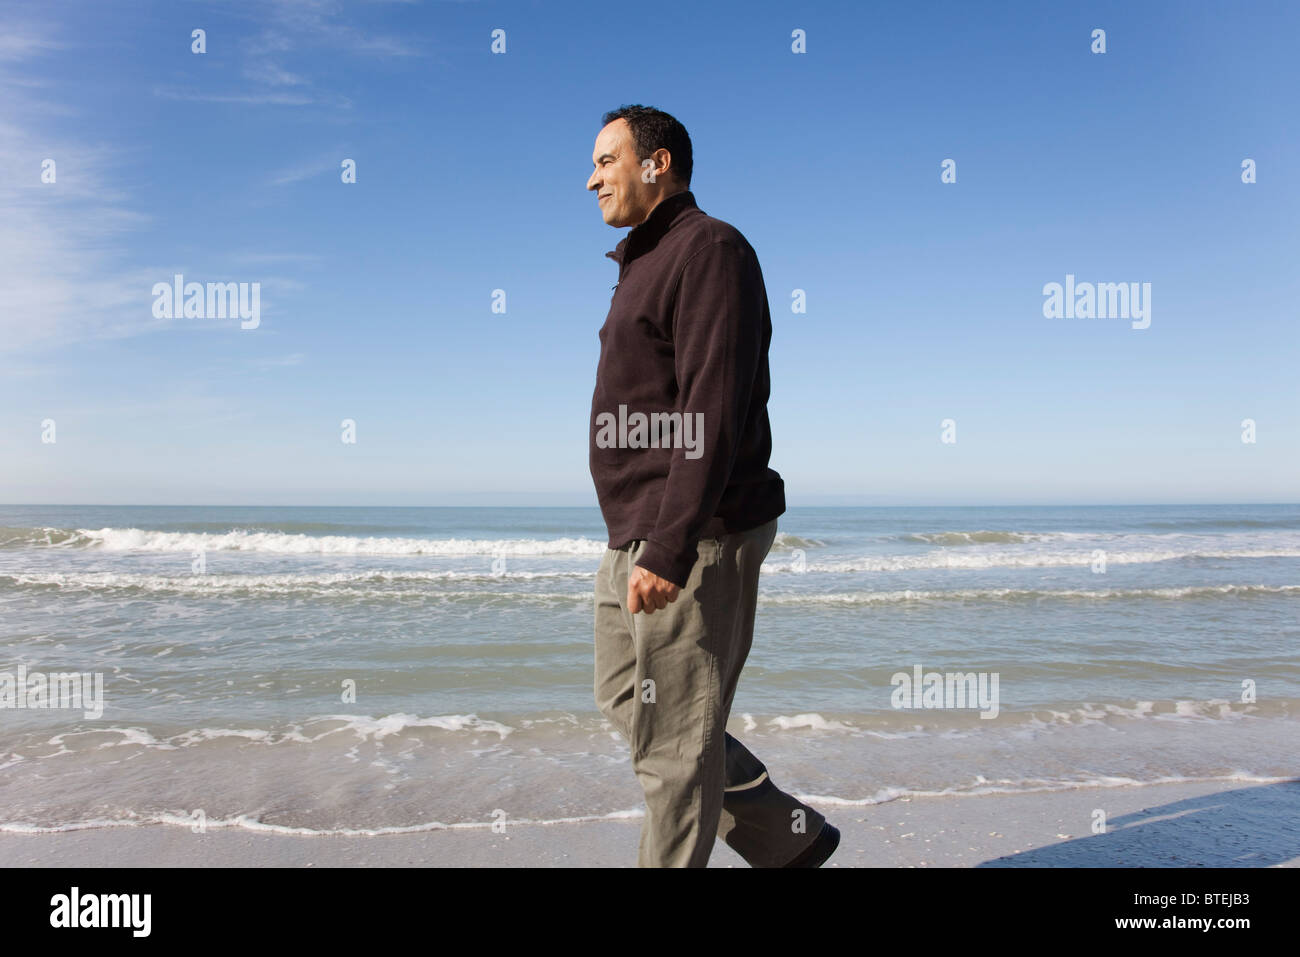 Man Walking on beach Banque D'Images